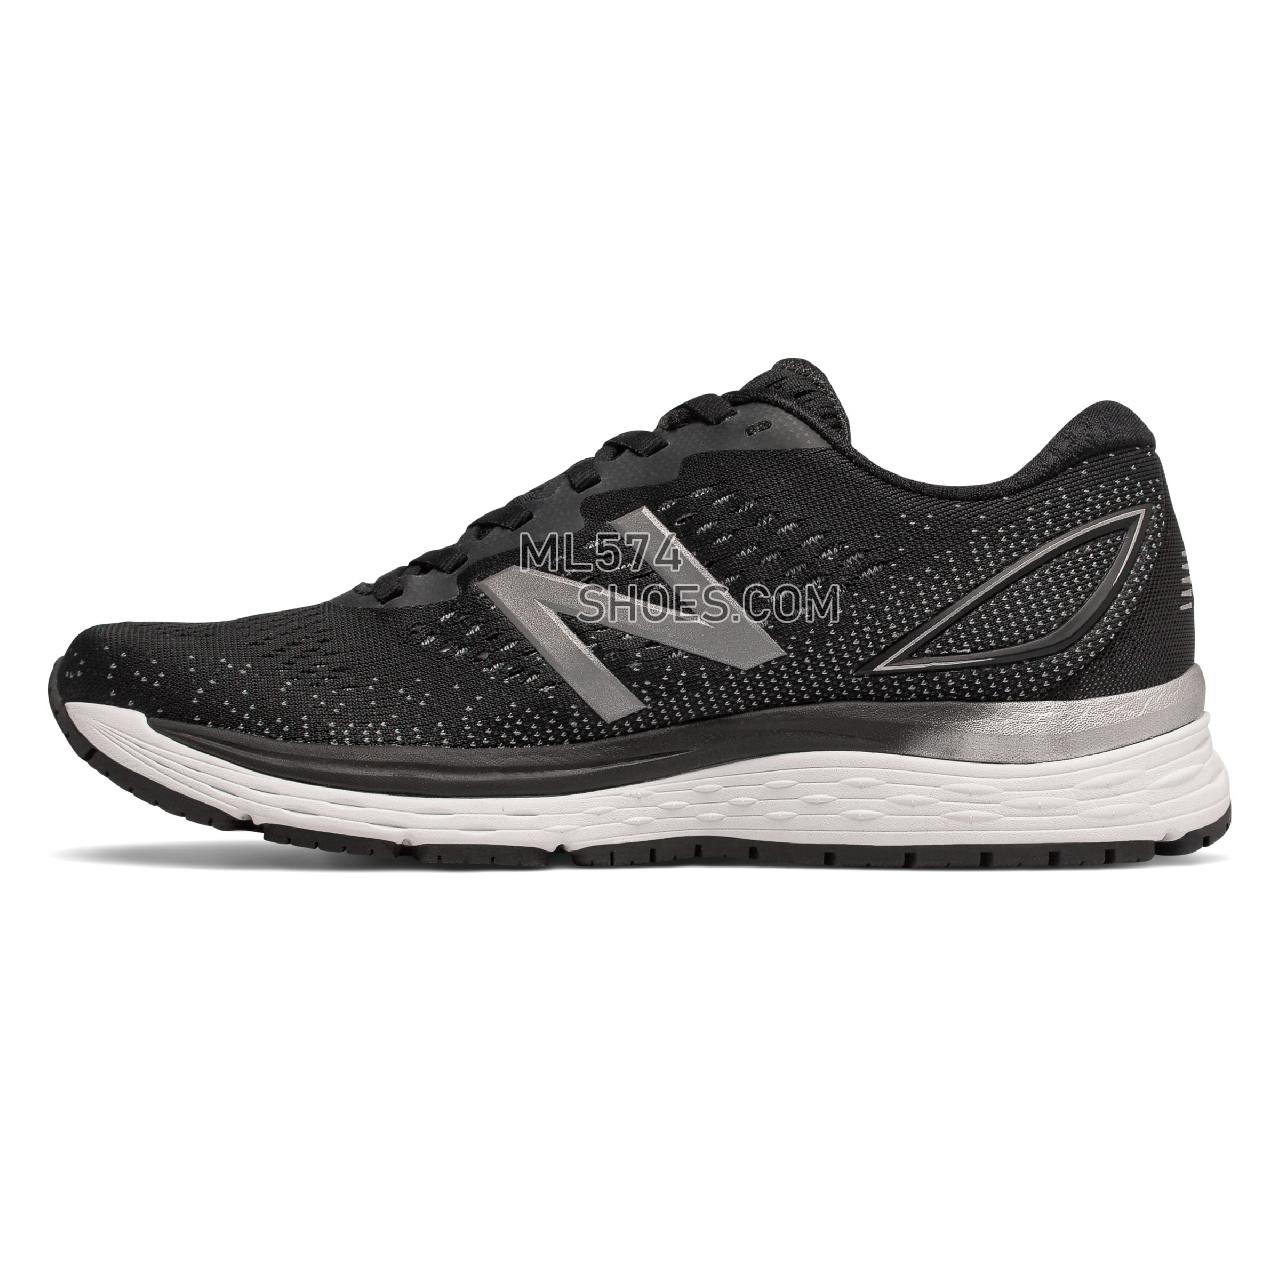 New Balance 880v9 - Women's Neutral Running - Black with Steel and Orca - W880BK9